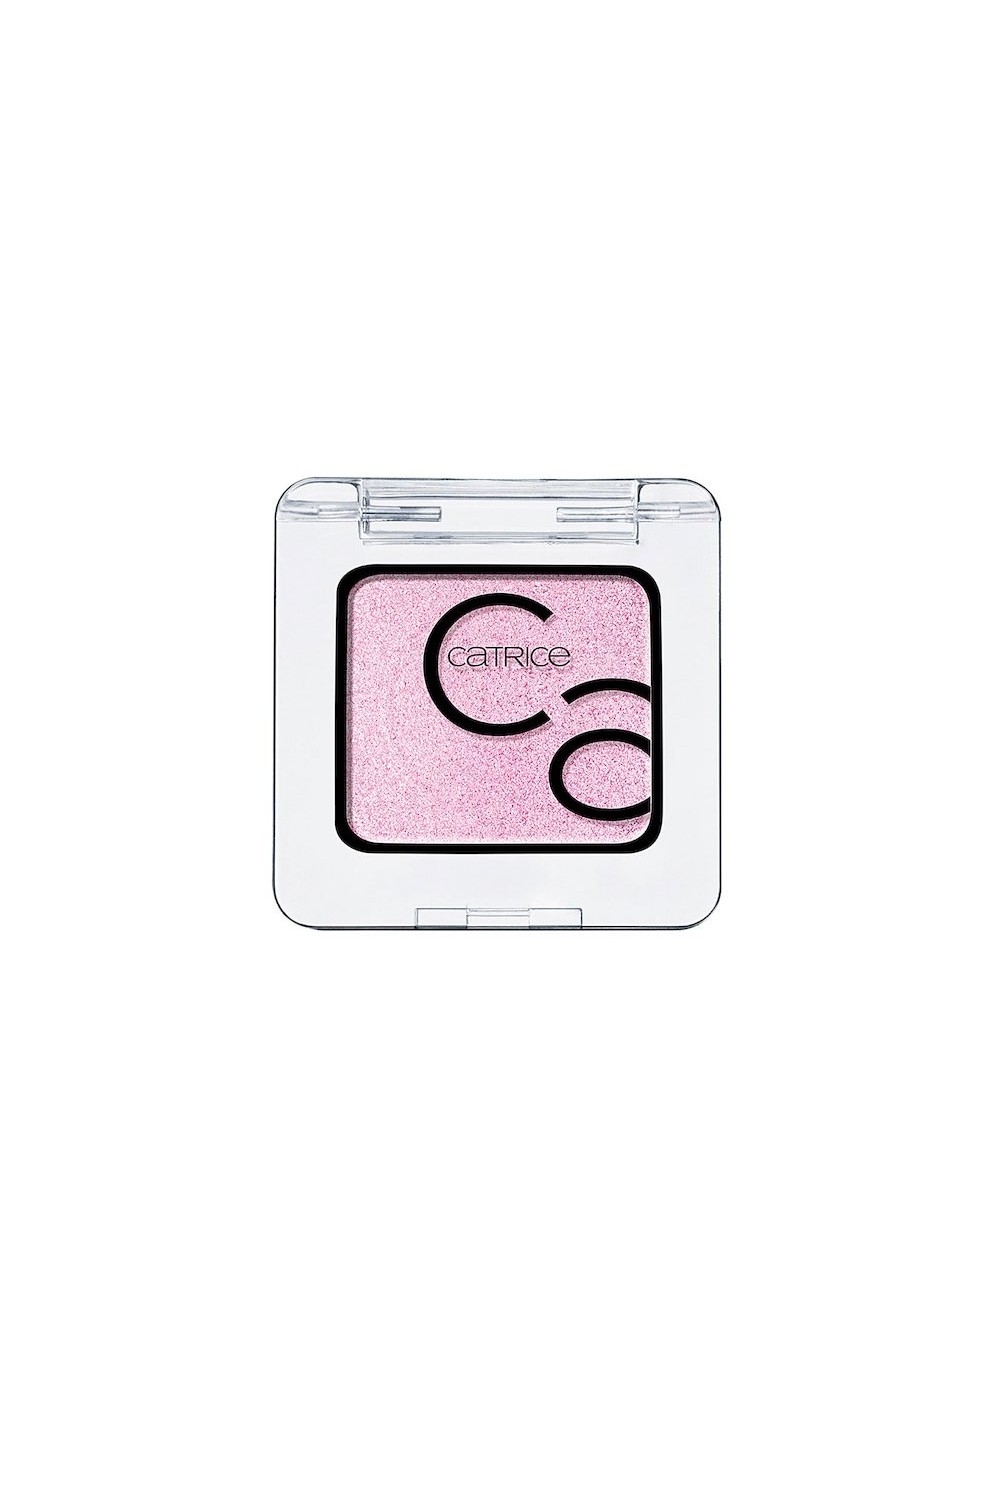 Catrice Art Couleurs Eyeshadow 160 Silicon Violet